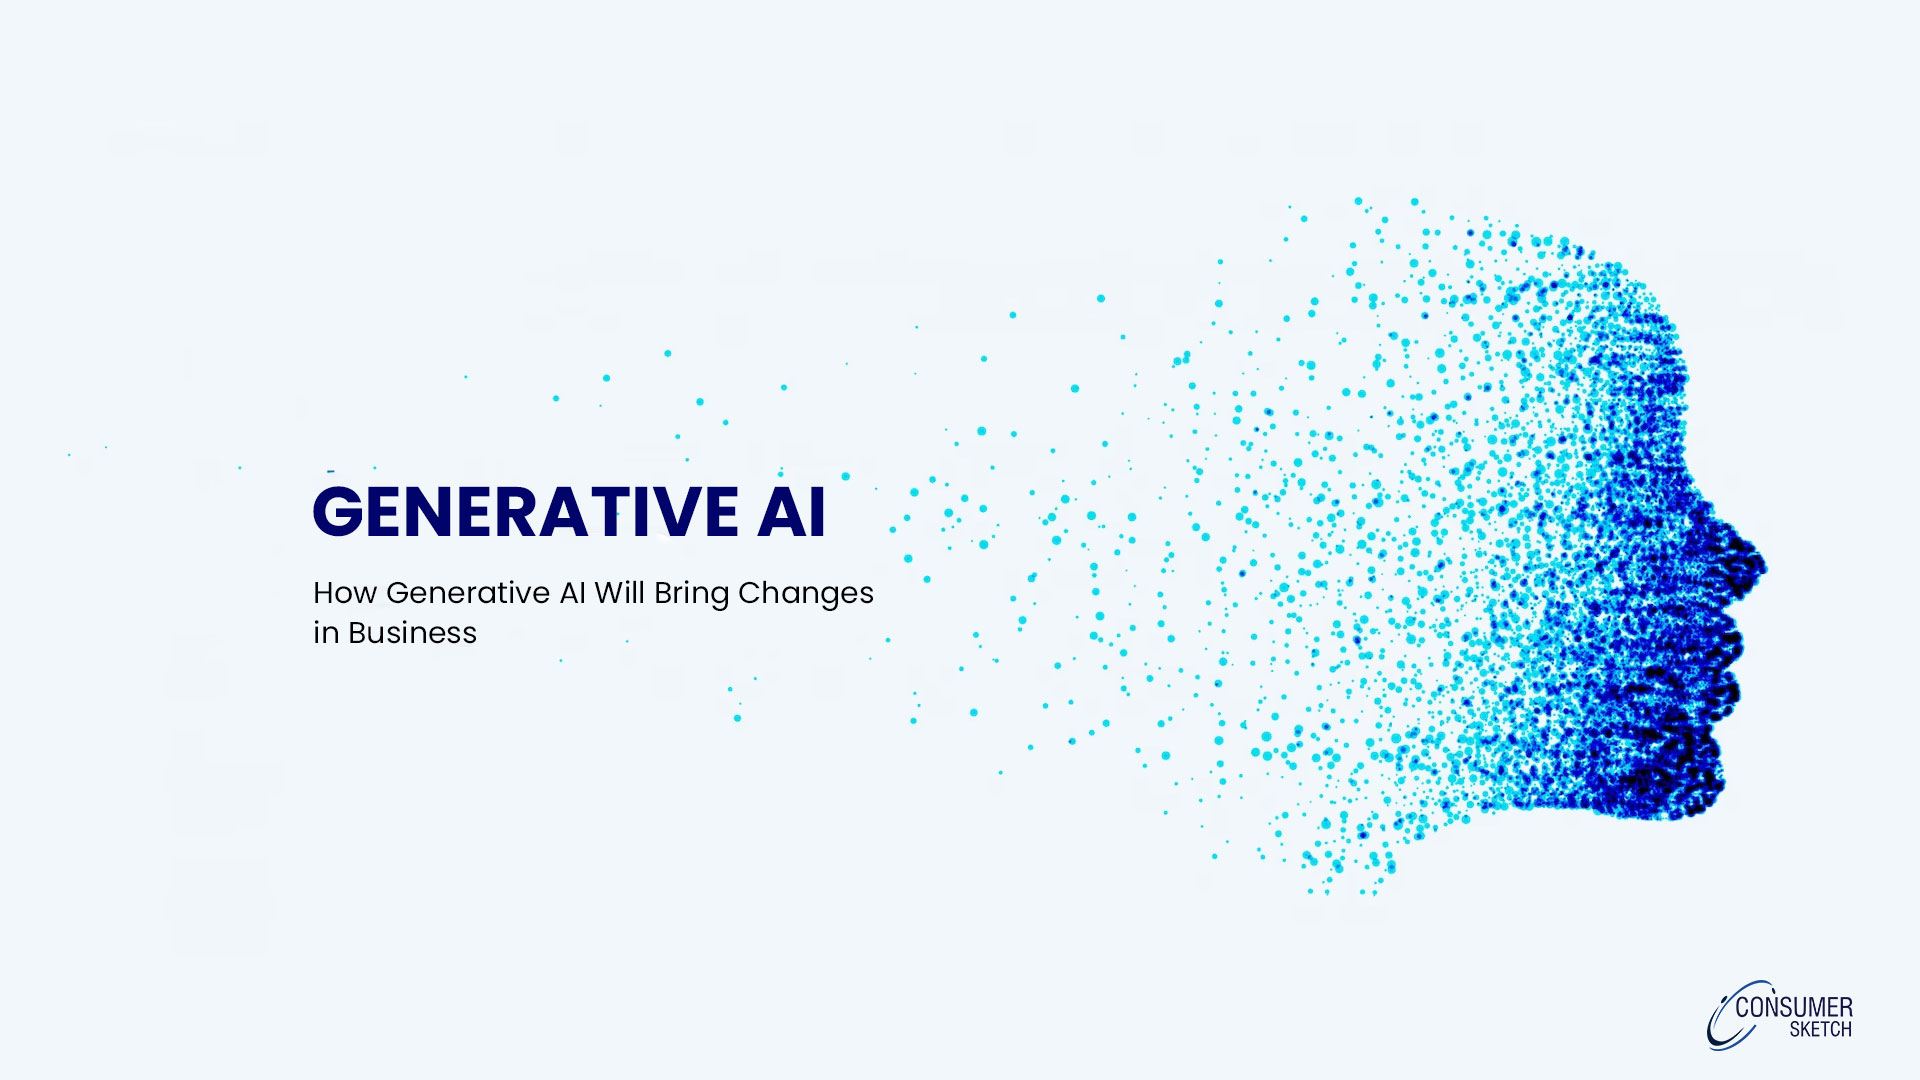 How Generative AI Will Bring Changes in Business